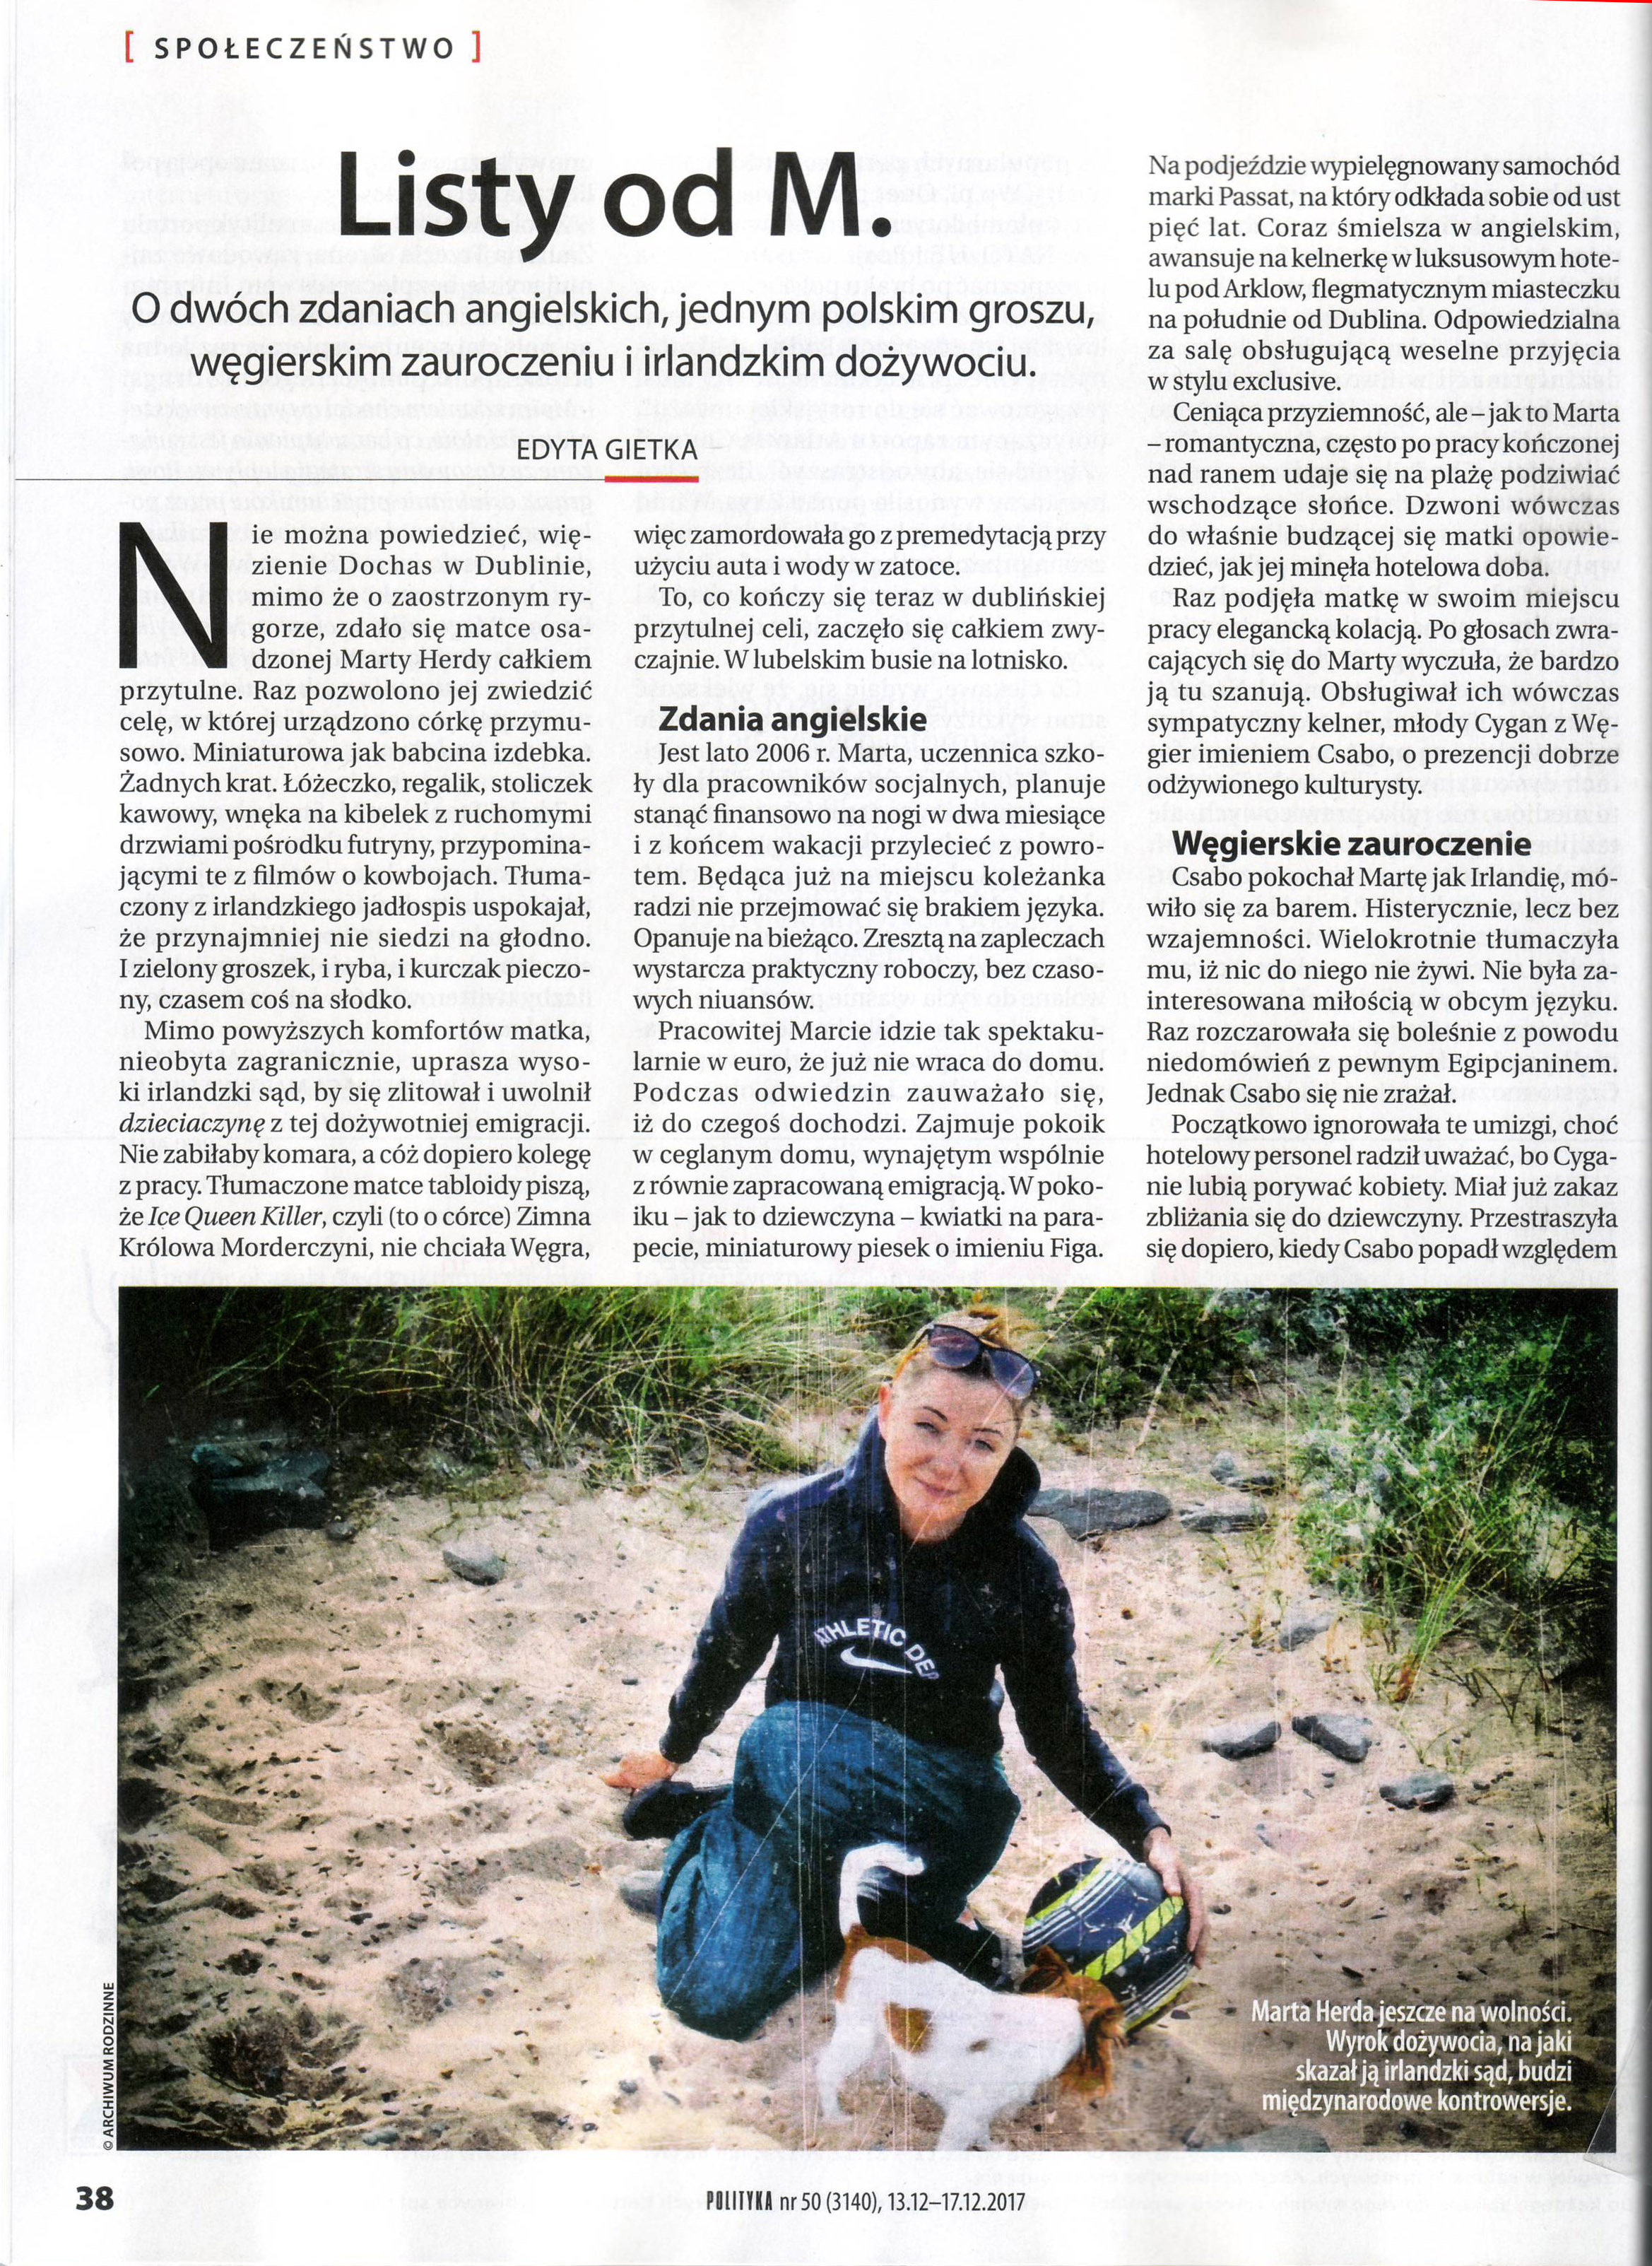 Article in "Polityka"